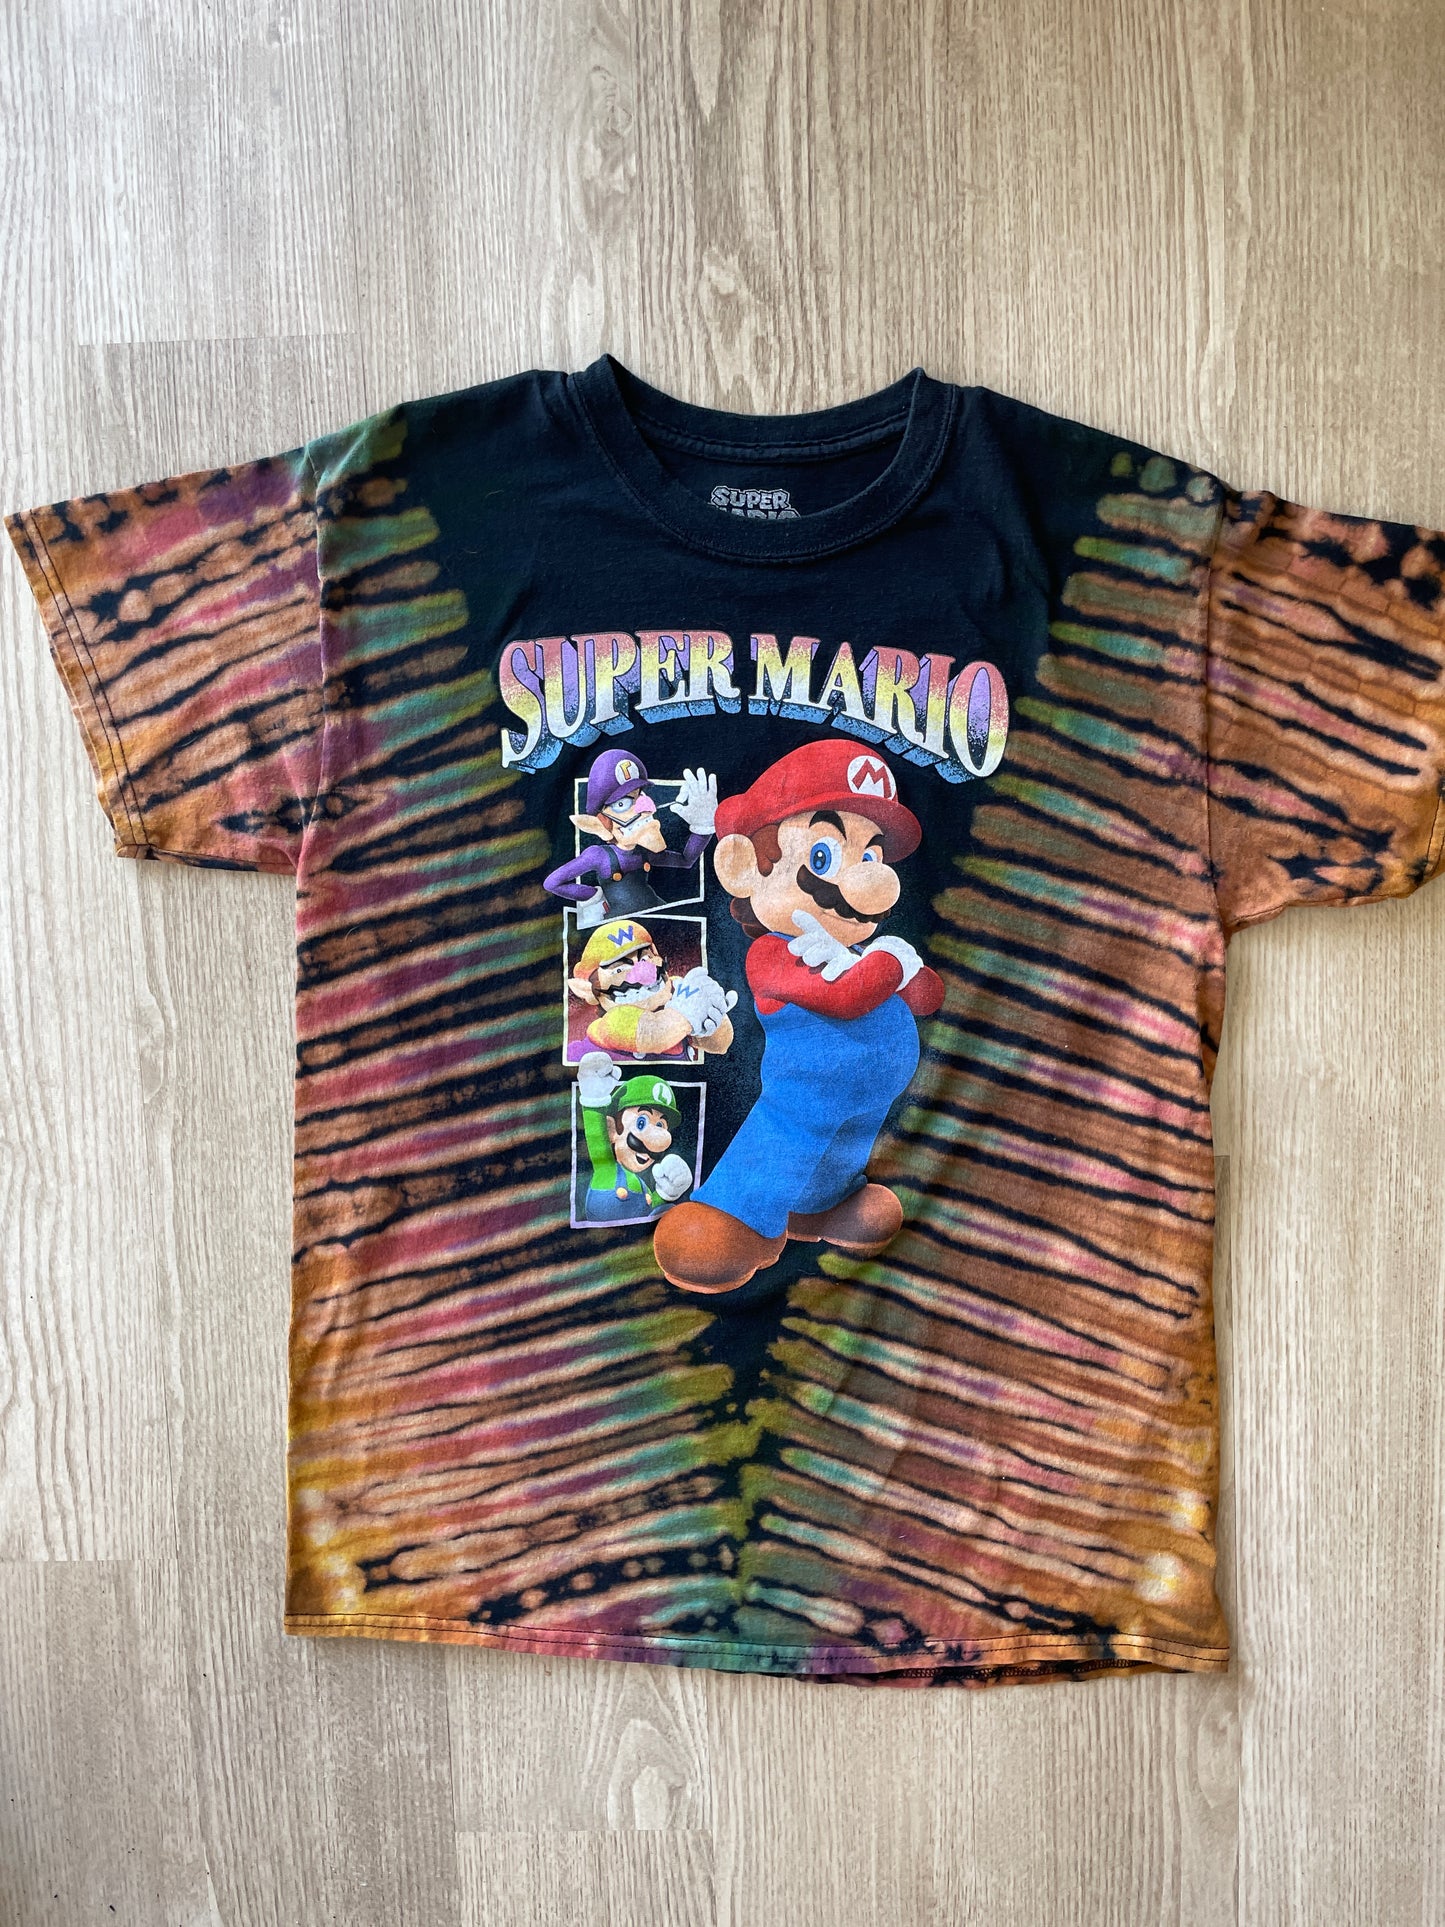 LARGE Men’s Super Mario Handmade Reverse Tie Dye T-Shirt | One-Of-a-Kind Black and Rainbow Pleated Short Sleeve